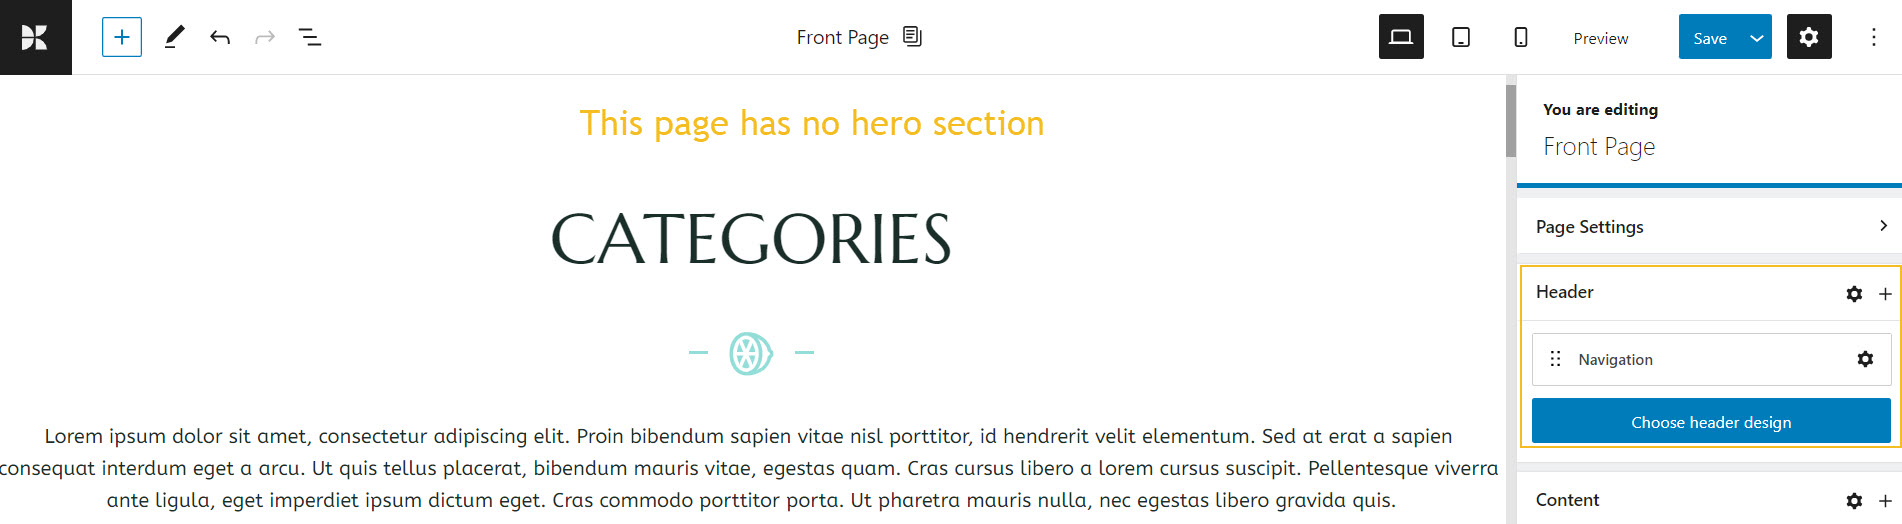 no hero section on the page